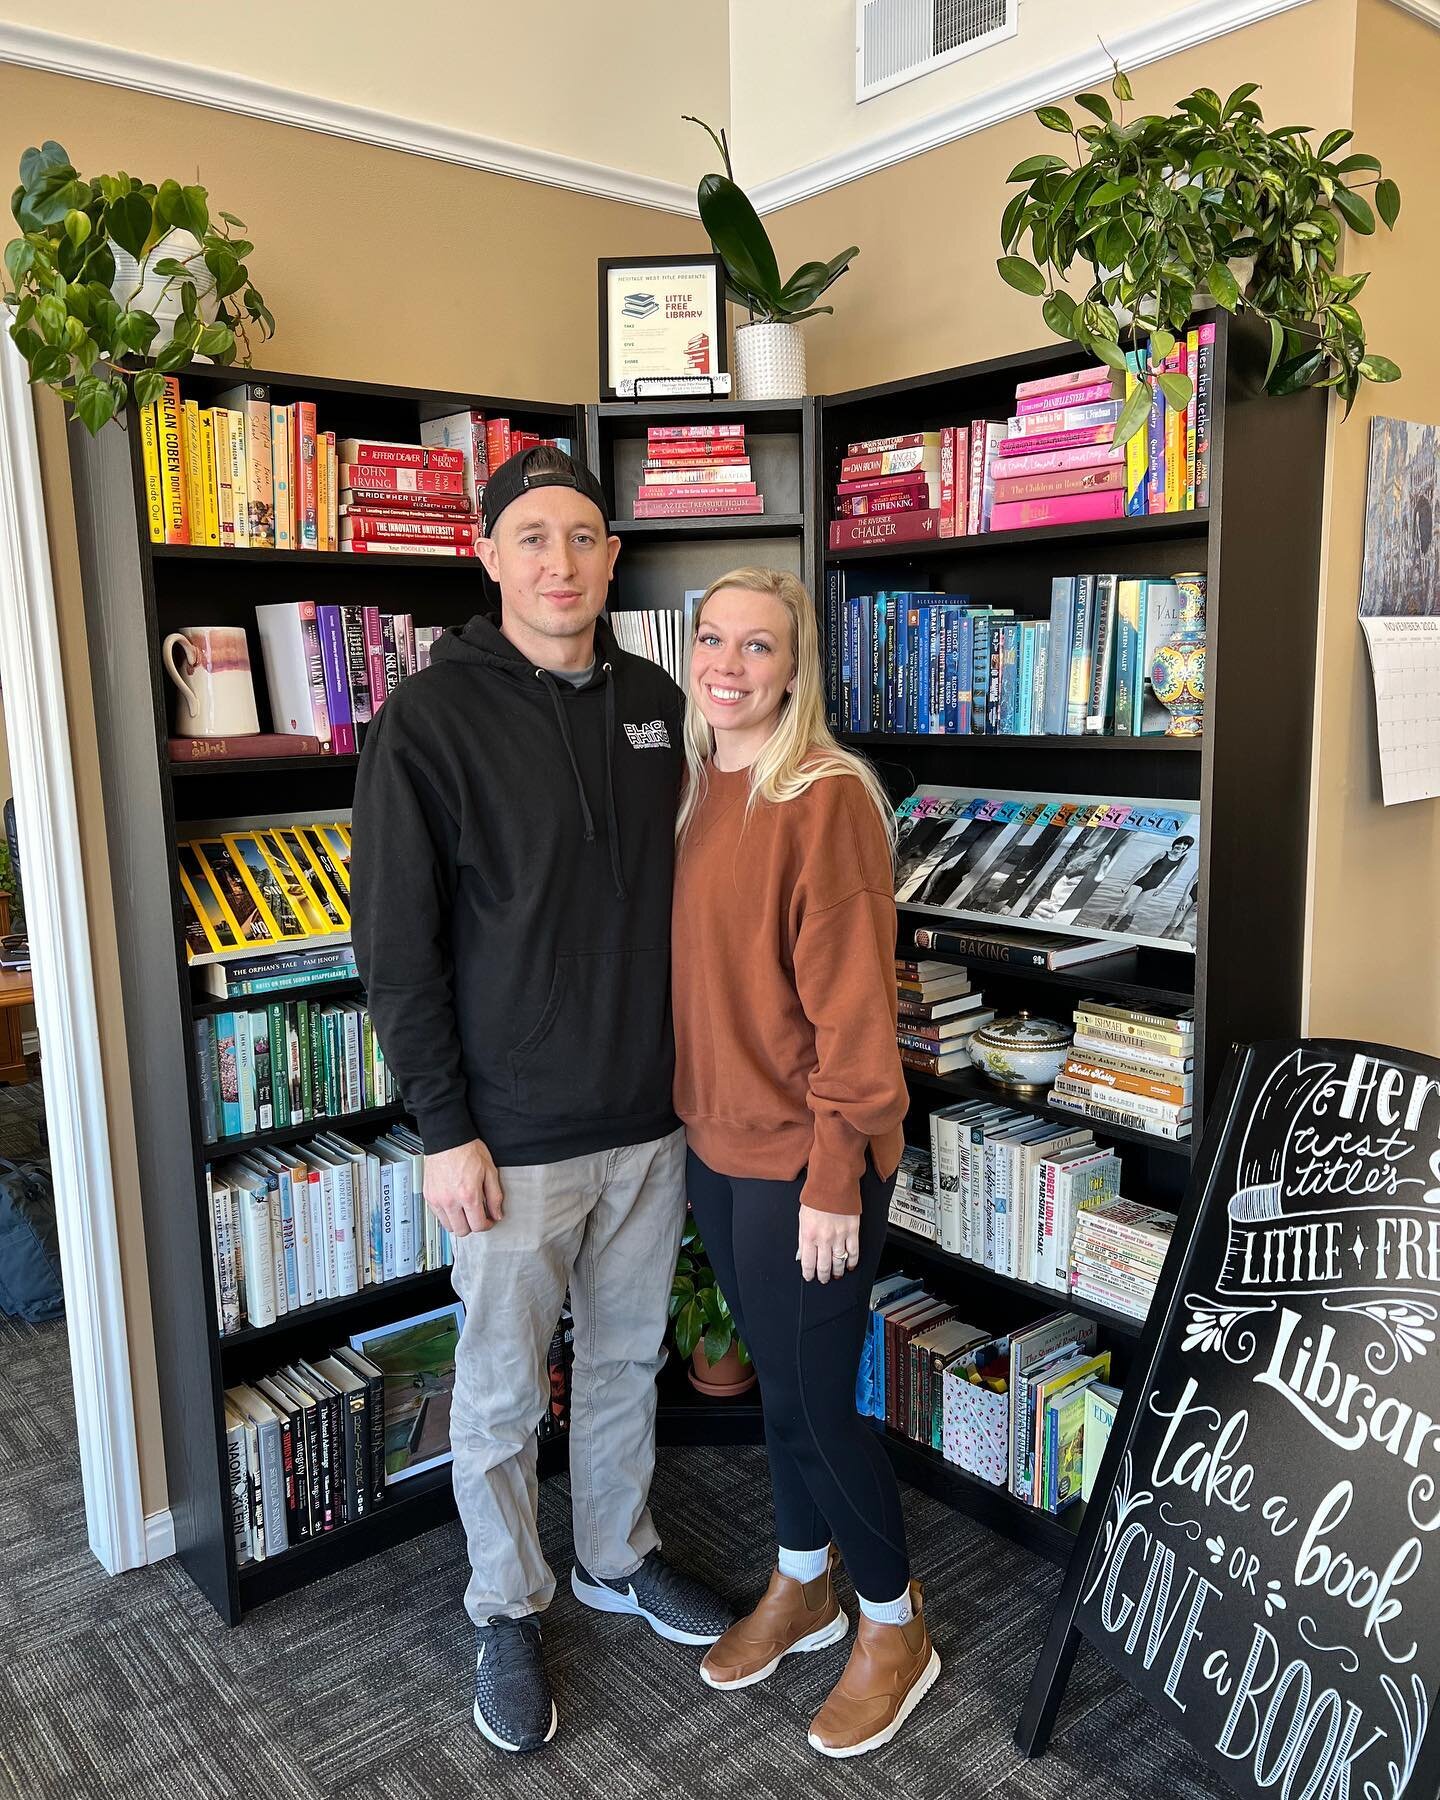 Congrats to these happy first-time home buyers Alex and McKell Huntsman! #firsttimehomebuyer #titleinsurance #titleinsurancecompany #titleinsuranceagent #titleinsurancerep #housing #housingmarket